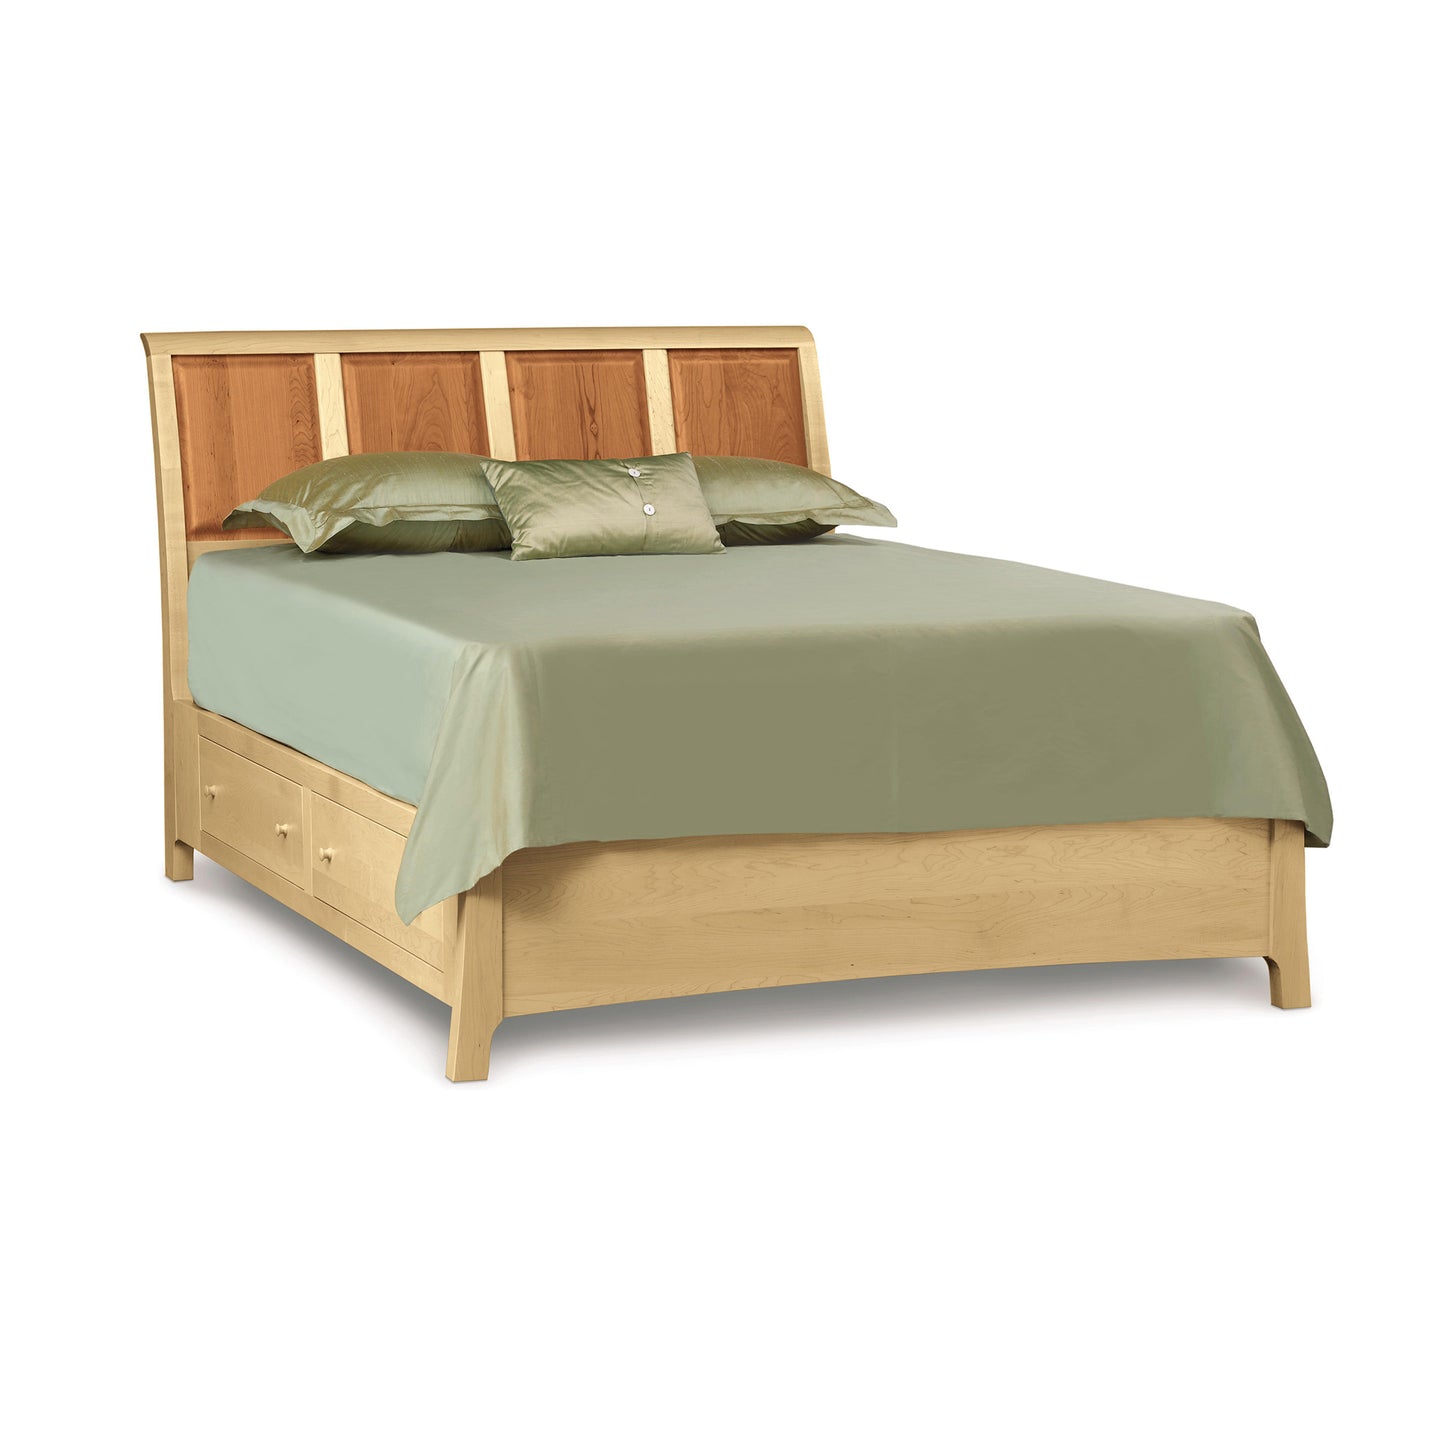 A Sarah Sleigh Storage Bed from Copeland Furniture, made of natural cherry wood with a light finish and equipped with storage drawers underneath, is adorned with a green bedsheet and matching pillows against a white background.